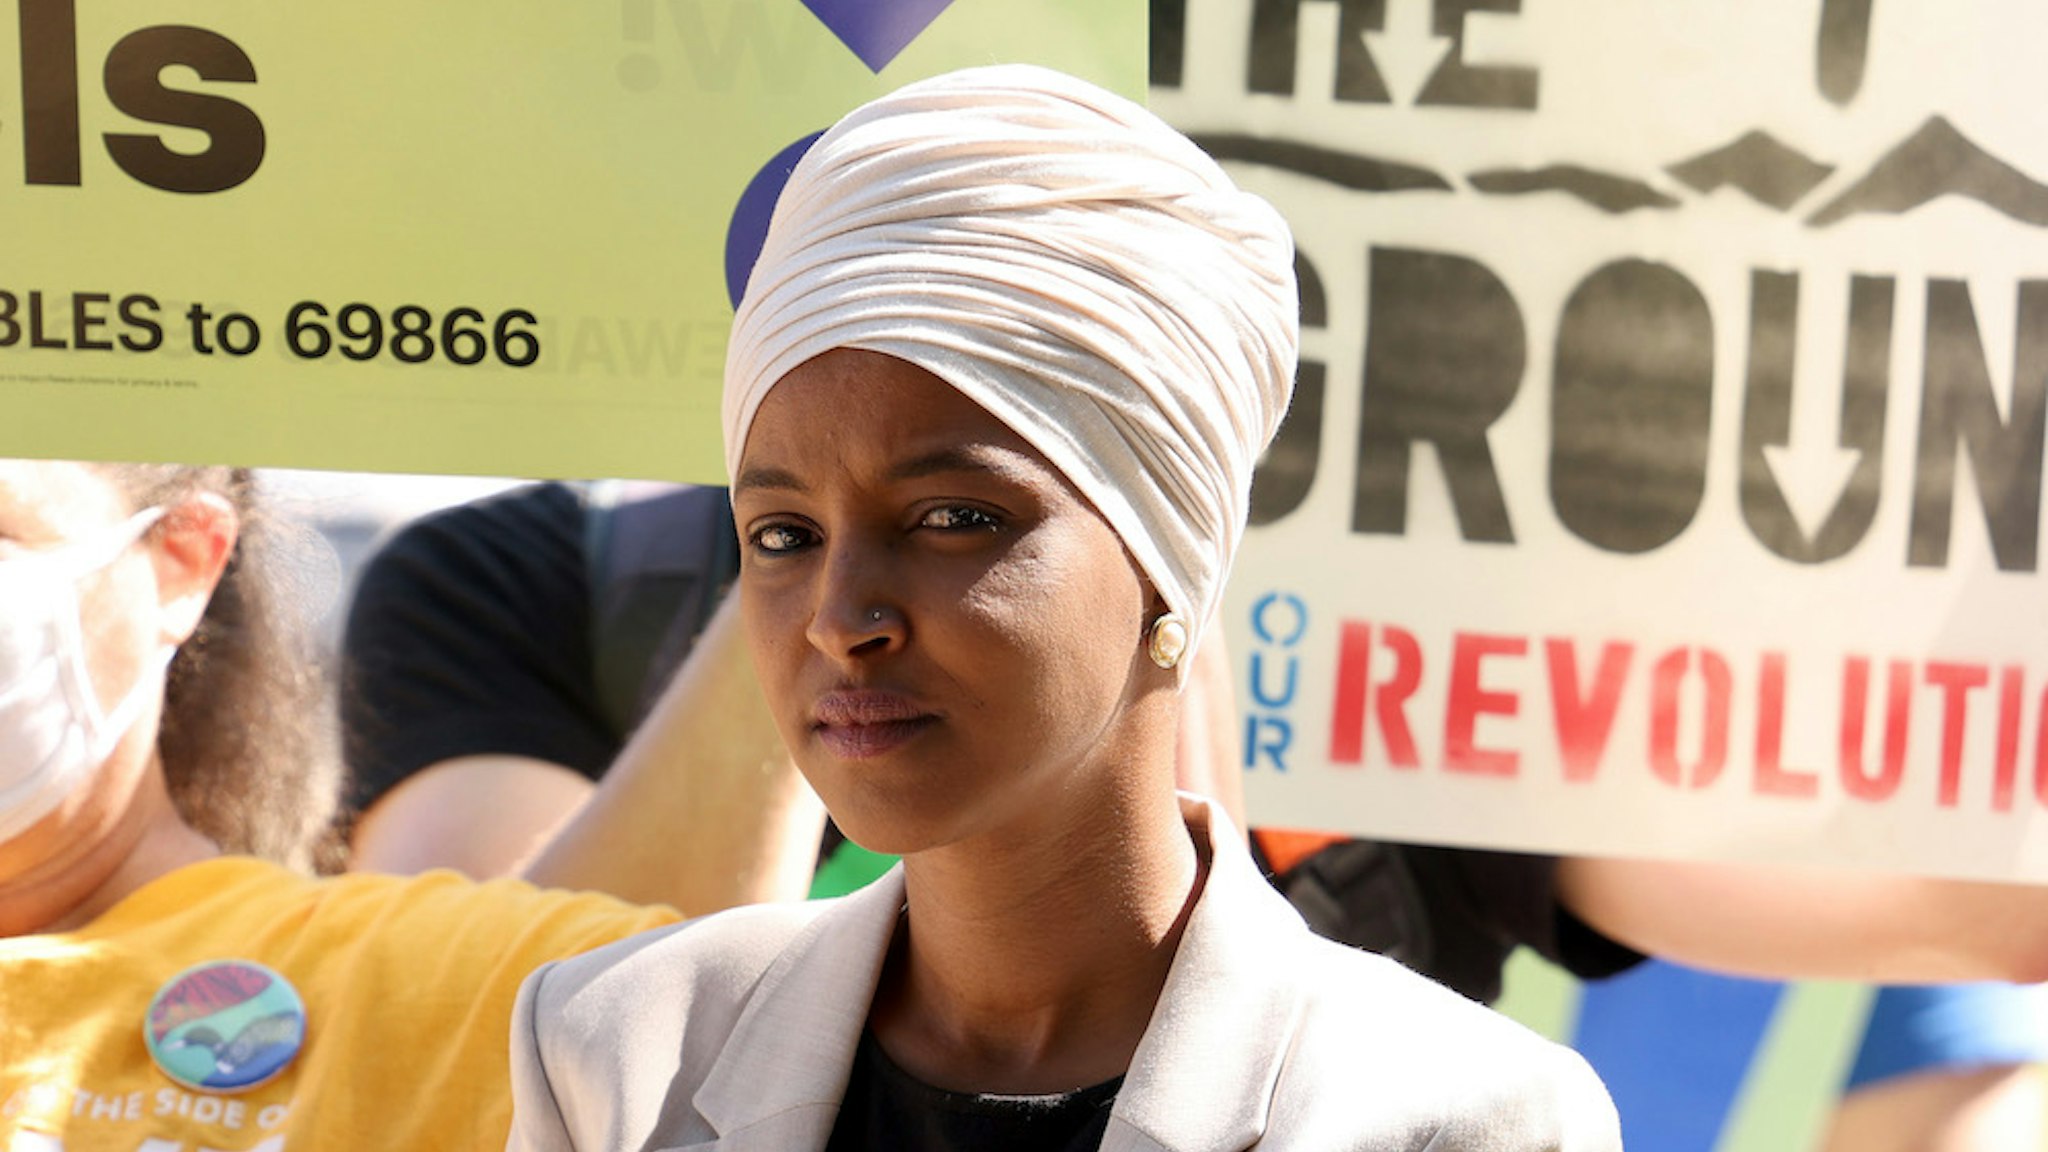 WASHINGTON, DC - JUNE 29: Rep. Ilhan Omar (D-MN) speaks at an “End Fossil Fuel” rally near the U.S. Capitol on June 29, 2021 in Washington, DC. Organized by Our Revolution, demonstrators called on Congress to take action in ending fossil fuel subsidies. (Photo by Anna Moneymaker/Getty Images)